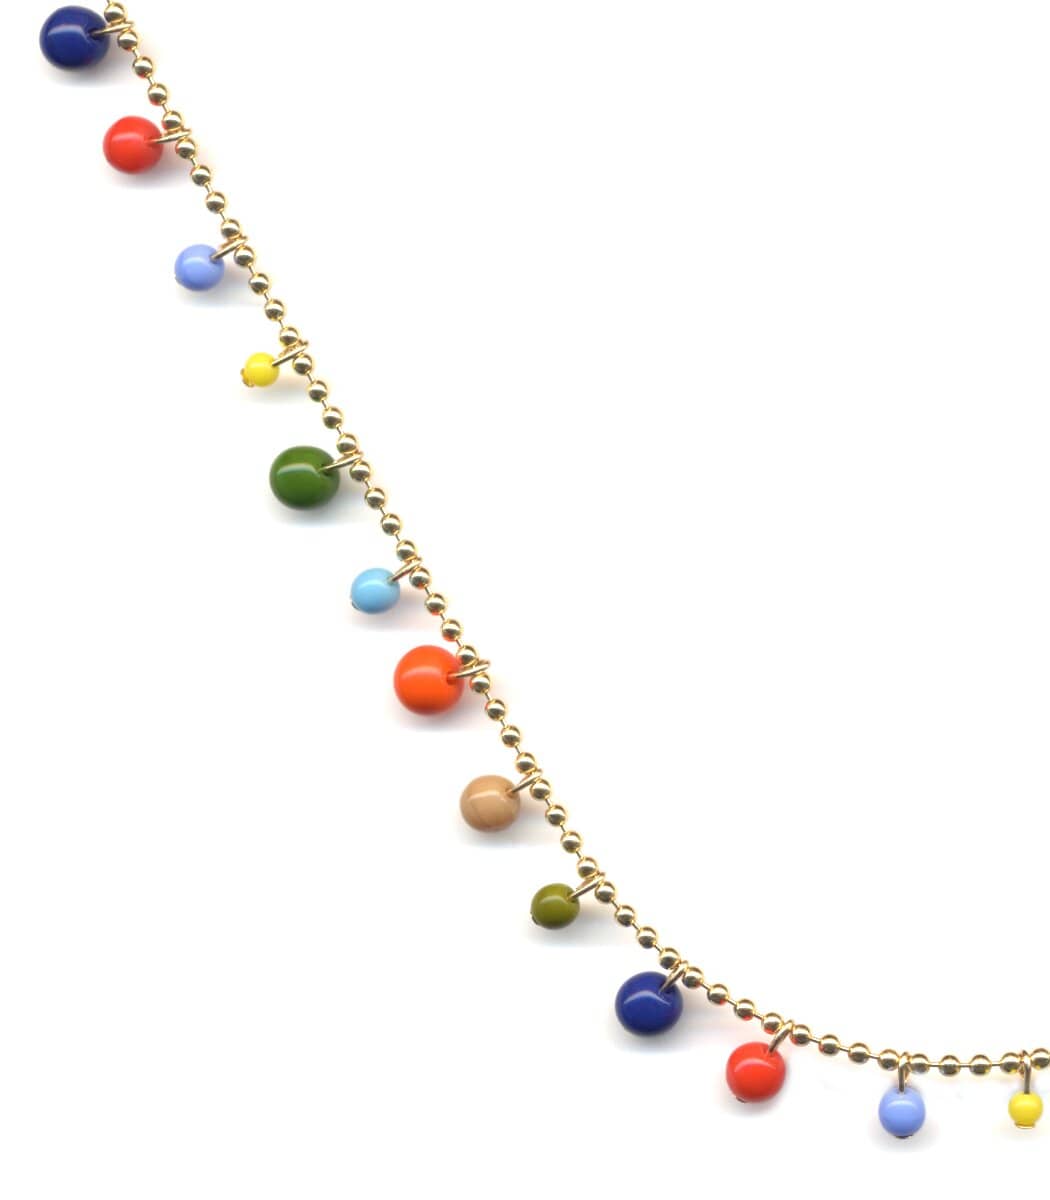 Irk Jewelry I. Ronni Kappos N1779 Garland Necklace